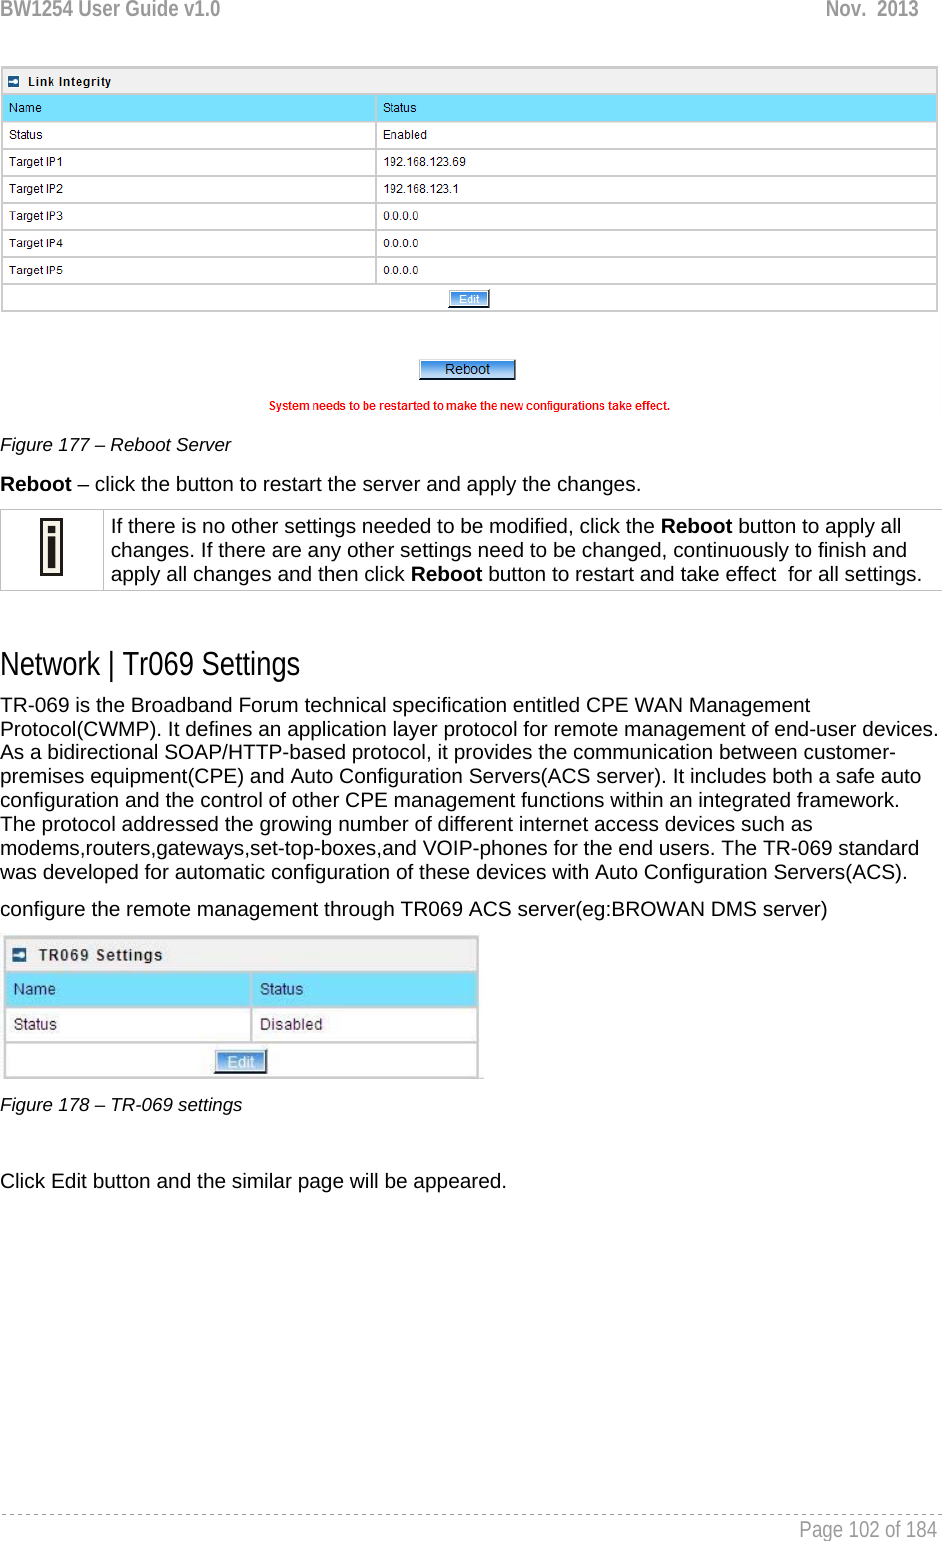 BW1254 User Guide v1.0  Nov.  2013     Page 102 of 184    Figure 177 – Reboot Server Reboot – click the button to restart the server and apply the changes.  If there is no other settings needed to be modified, click the Reboot button to apply all changes. If there are any other settings need to be changed, continuously to finish and apply all changes and then click Reboot button to restart and take effect  for all settings.  Network | Tr069 Settings TR-069 is the Broadband Forum technical specification entitled CPE WAN Management Protocol(CWMP). It defines an application layer protocol for remote management of end-user devices. As a bidirectional SOAP/HTTP-based protocol, it provides the communication between customer-premises equipment(CPE) and Auto Configuration Servers(ACS server). It includes both a safe auto configuration and the control of other CPE management functions within an integrated framework. The protocol addressed the growing number of different internet access devices such as modems,routers,gateways,set-top-boxes,and VOIP-phones for the end users. The TR-069 standard was developed for automatic configuration of these devices with Auto Configuration Servers(ACS). configure the remote management through TR069 ACS server(eg:BROWAN DMS server)  Figure 178 – TR-069 settings  Click Edit button and the similar page will be appeared. 